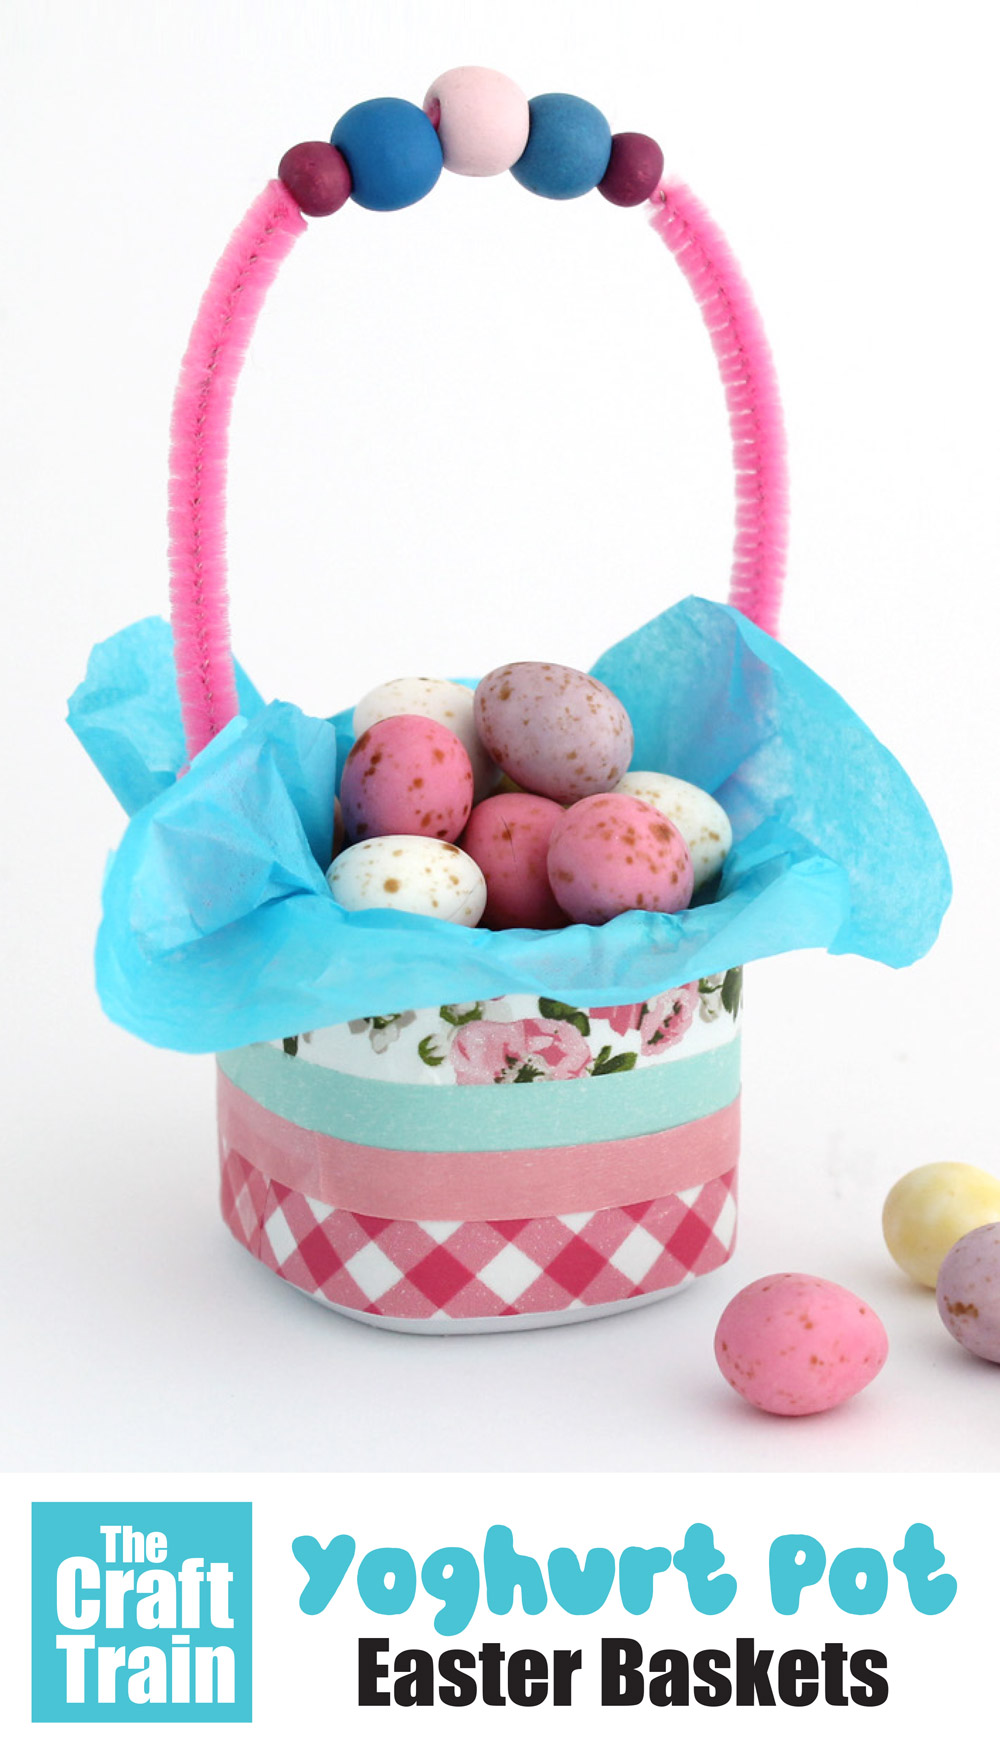 yoghurt tub easter basket upcycling craft. Decorate the yoghurt tub with washi tape